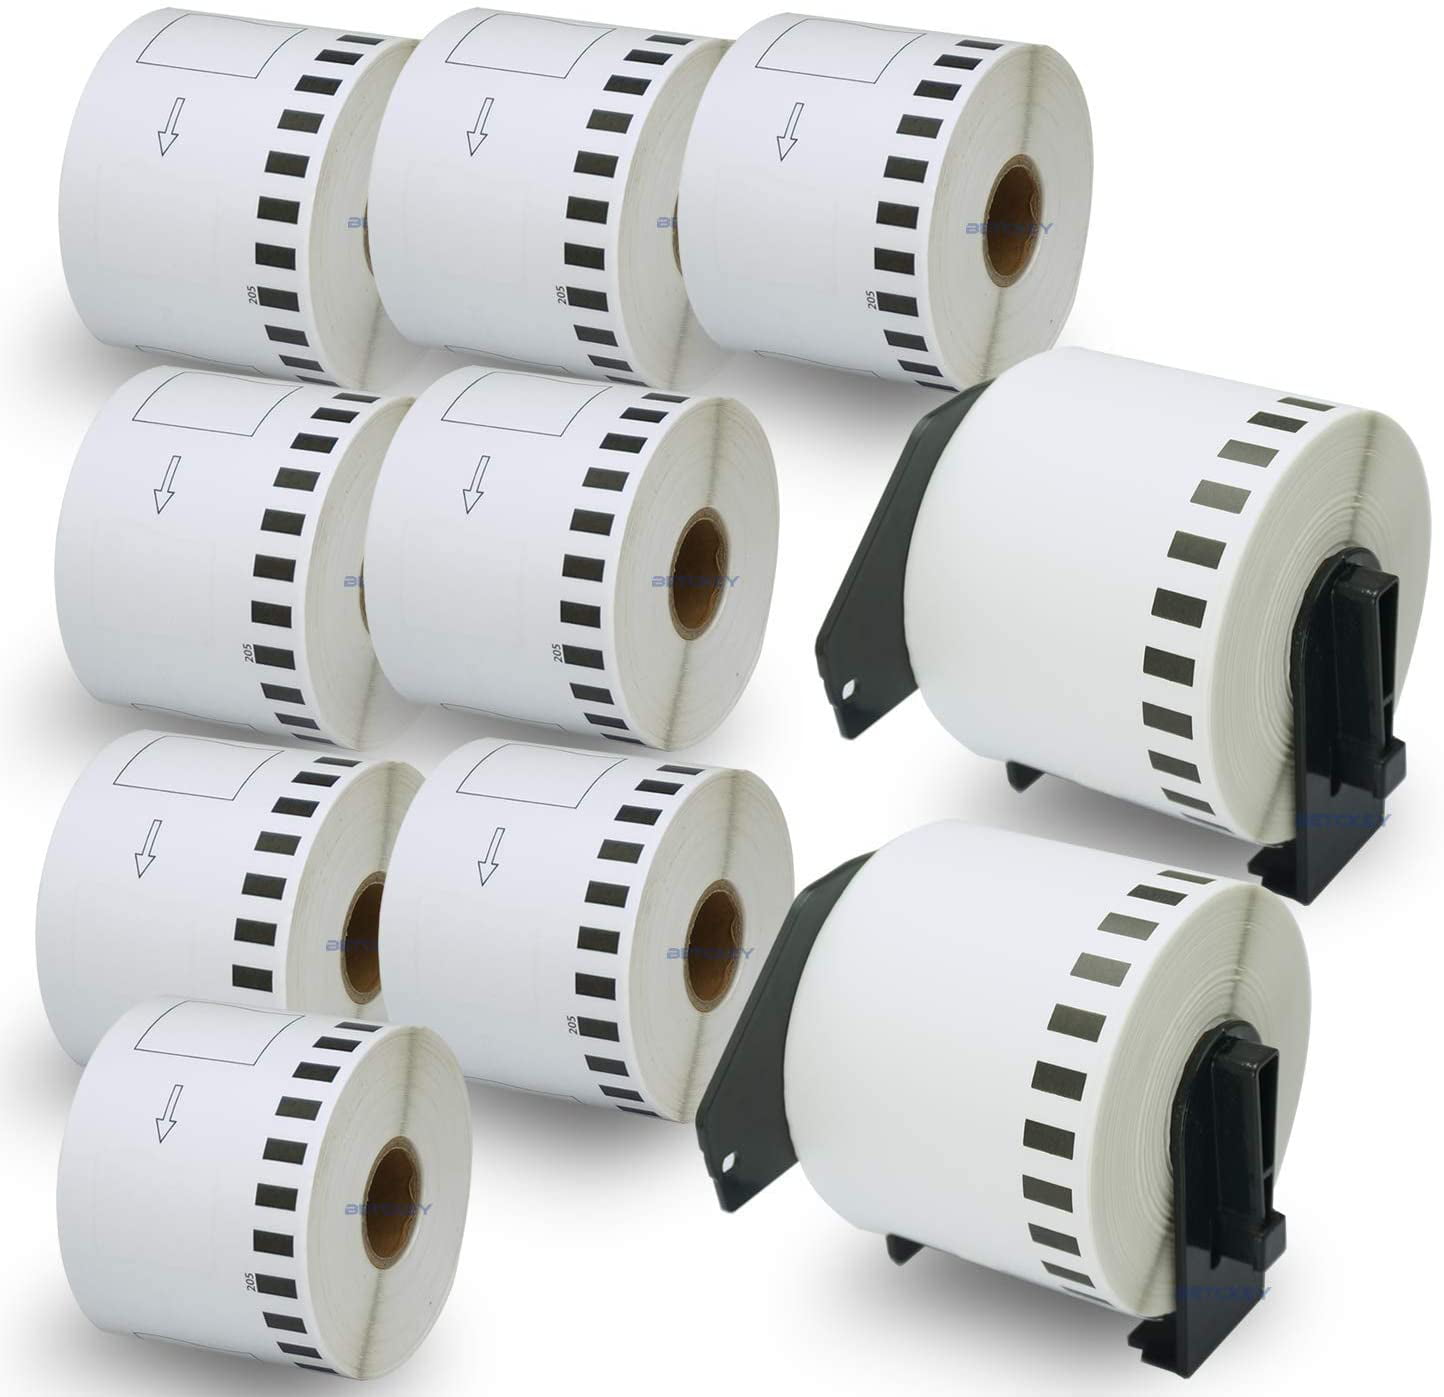 Labels Continuous 6 Rolls DK-2205 Brother-Compatible + 1 Cartridge BPA FREE